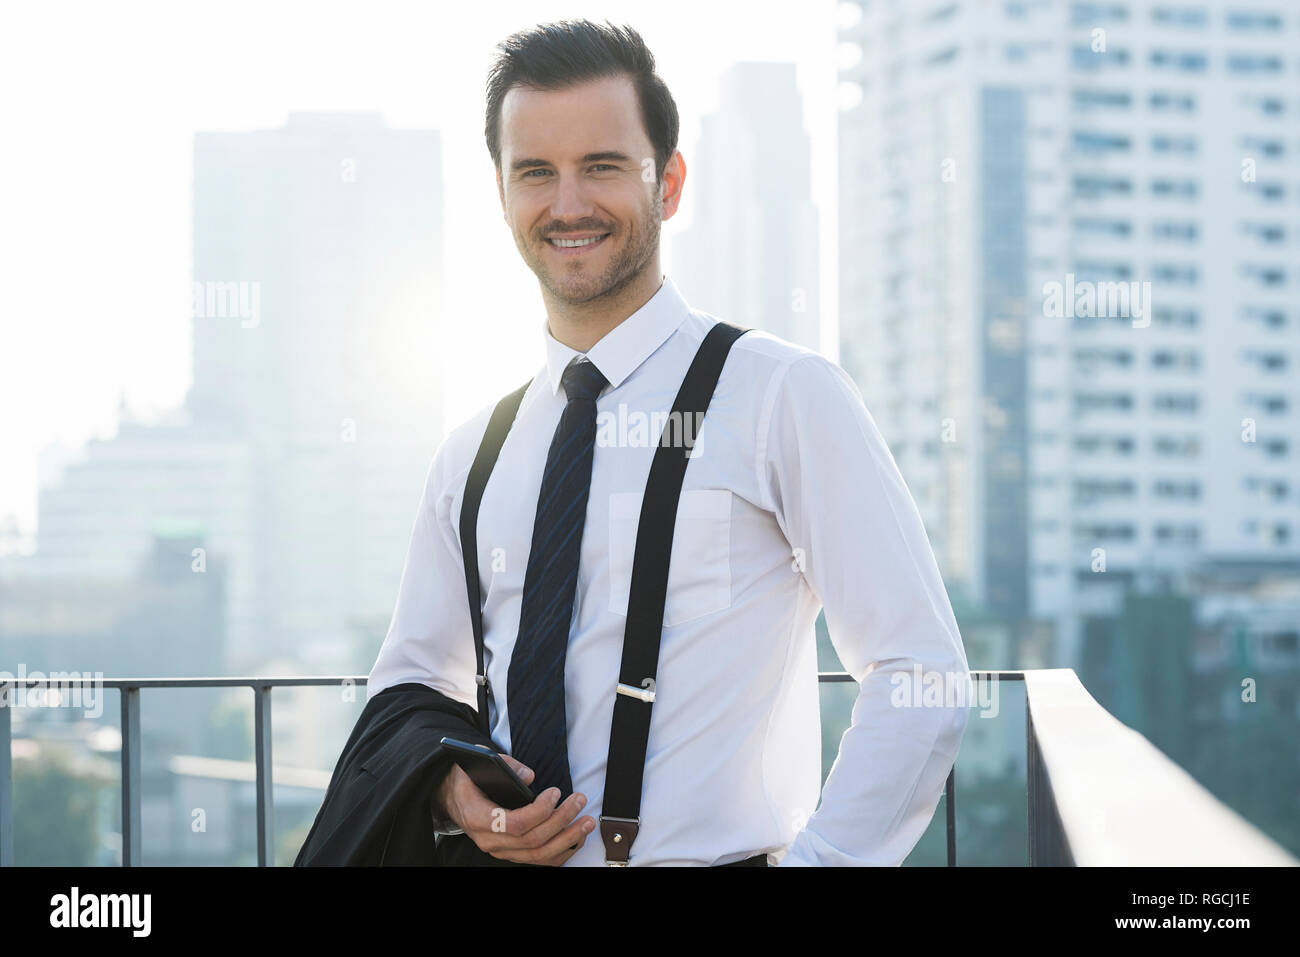 Portrait of business man on city rooftop Stock Photo